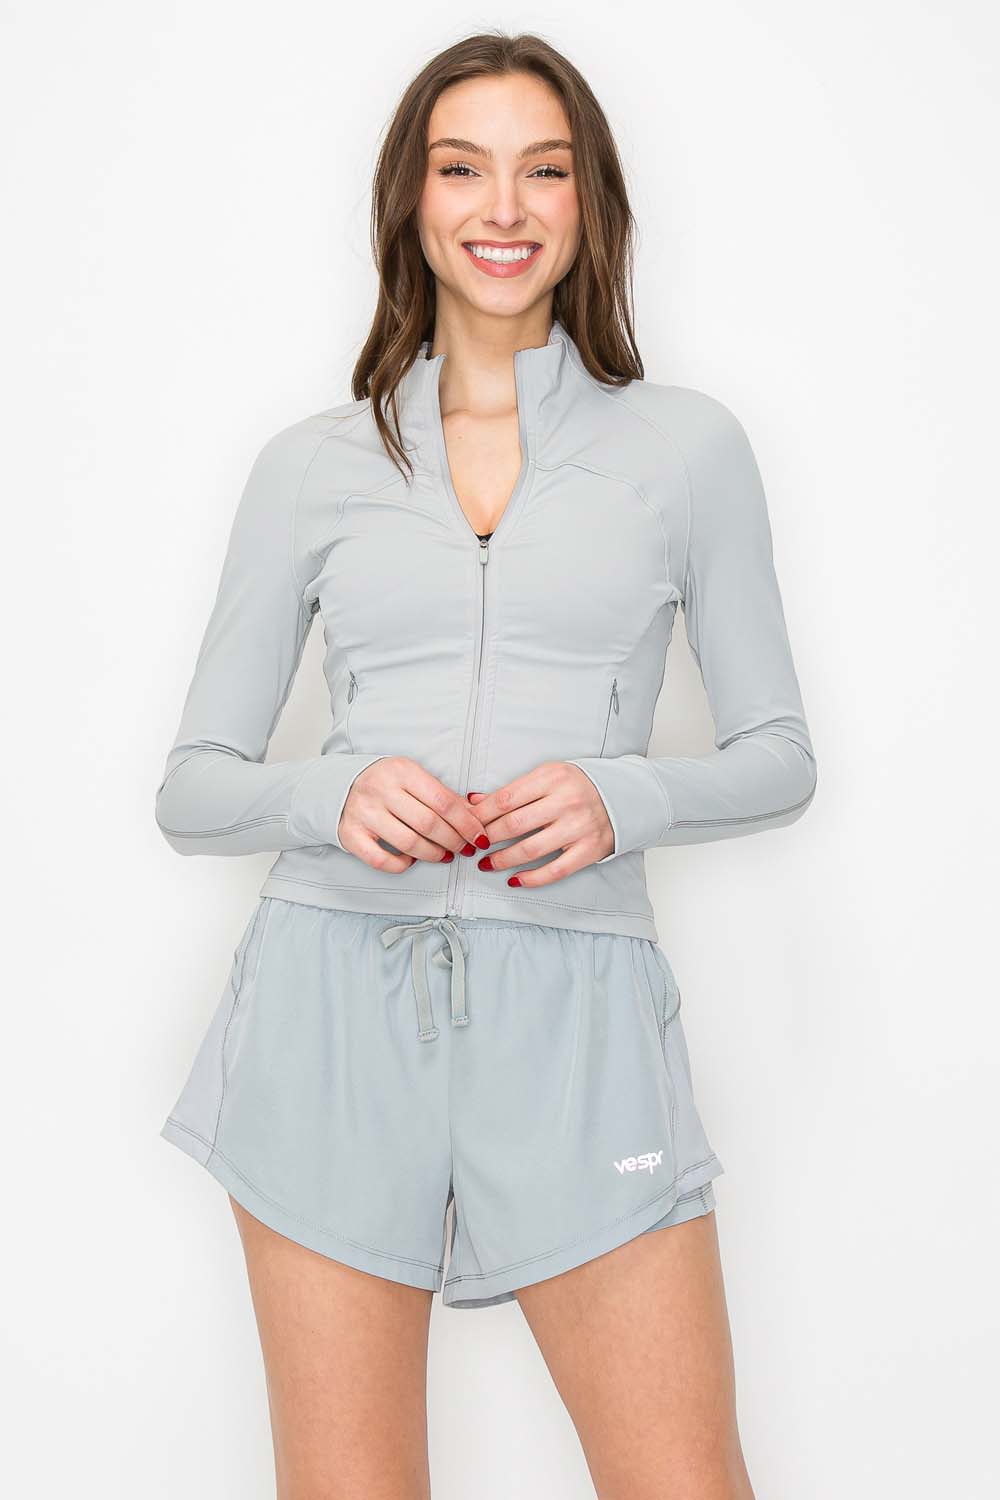 Contour Running Jacket - Smooth Silver - front